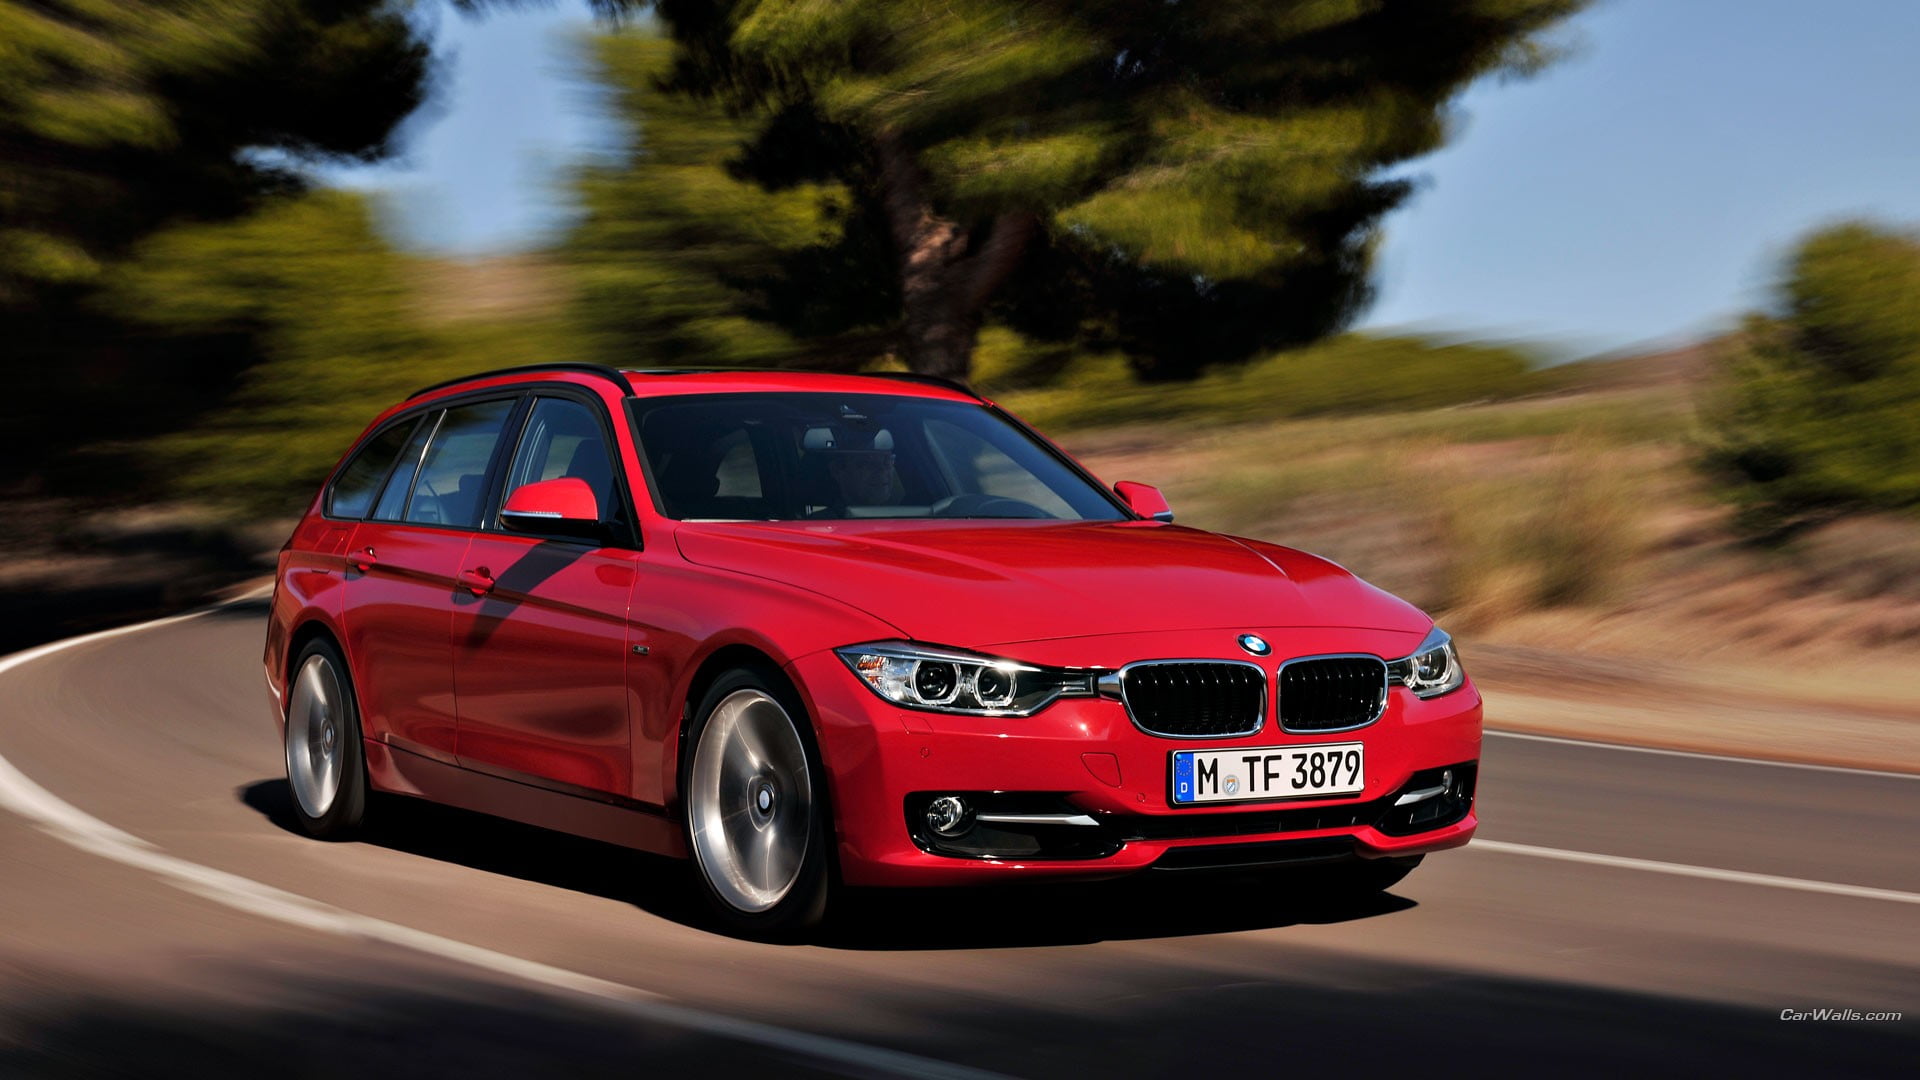 Red Bmw Station Wagon Bmw 3 Bmw Road Red Cars Hd Wallpaper Wallpaper Flare